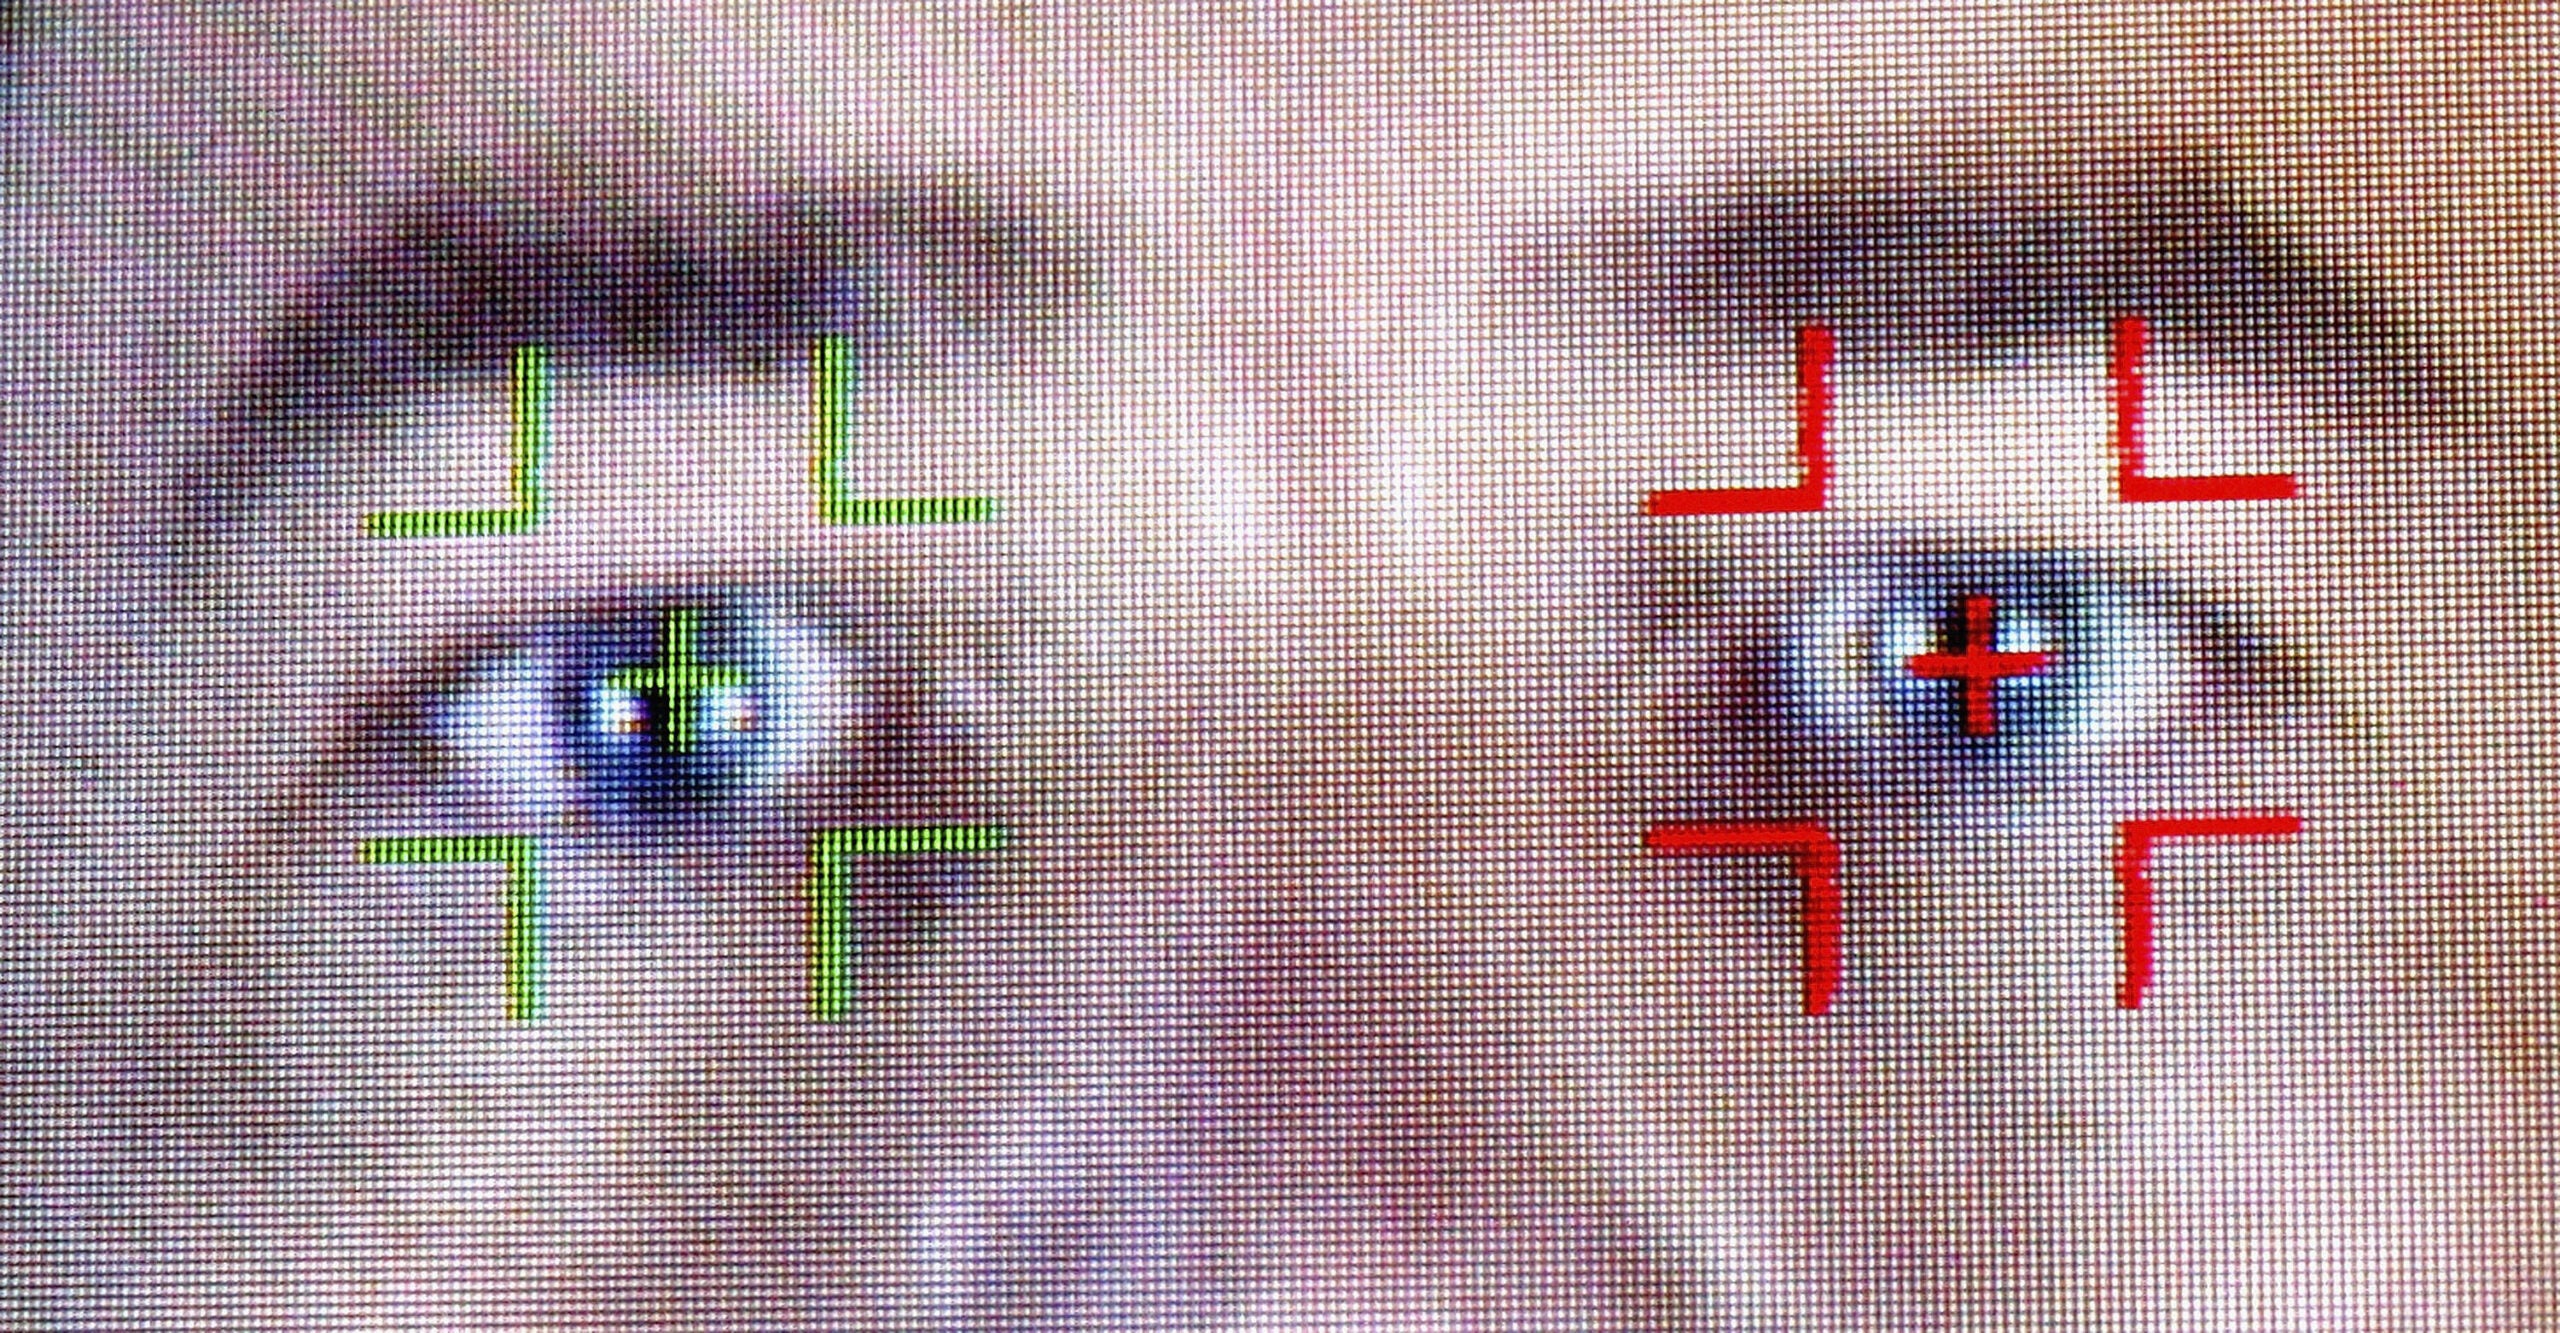 How facial recognition is being used to target sex workers